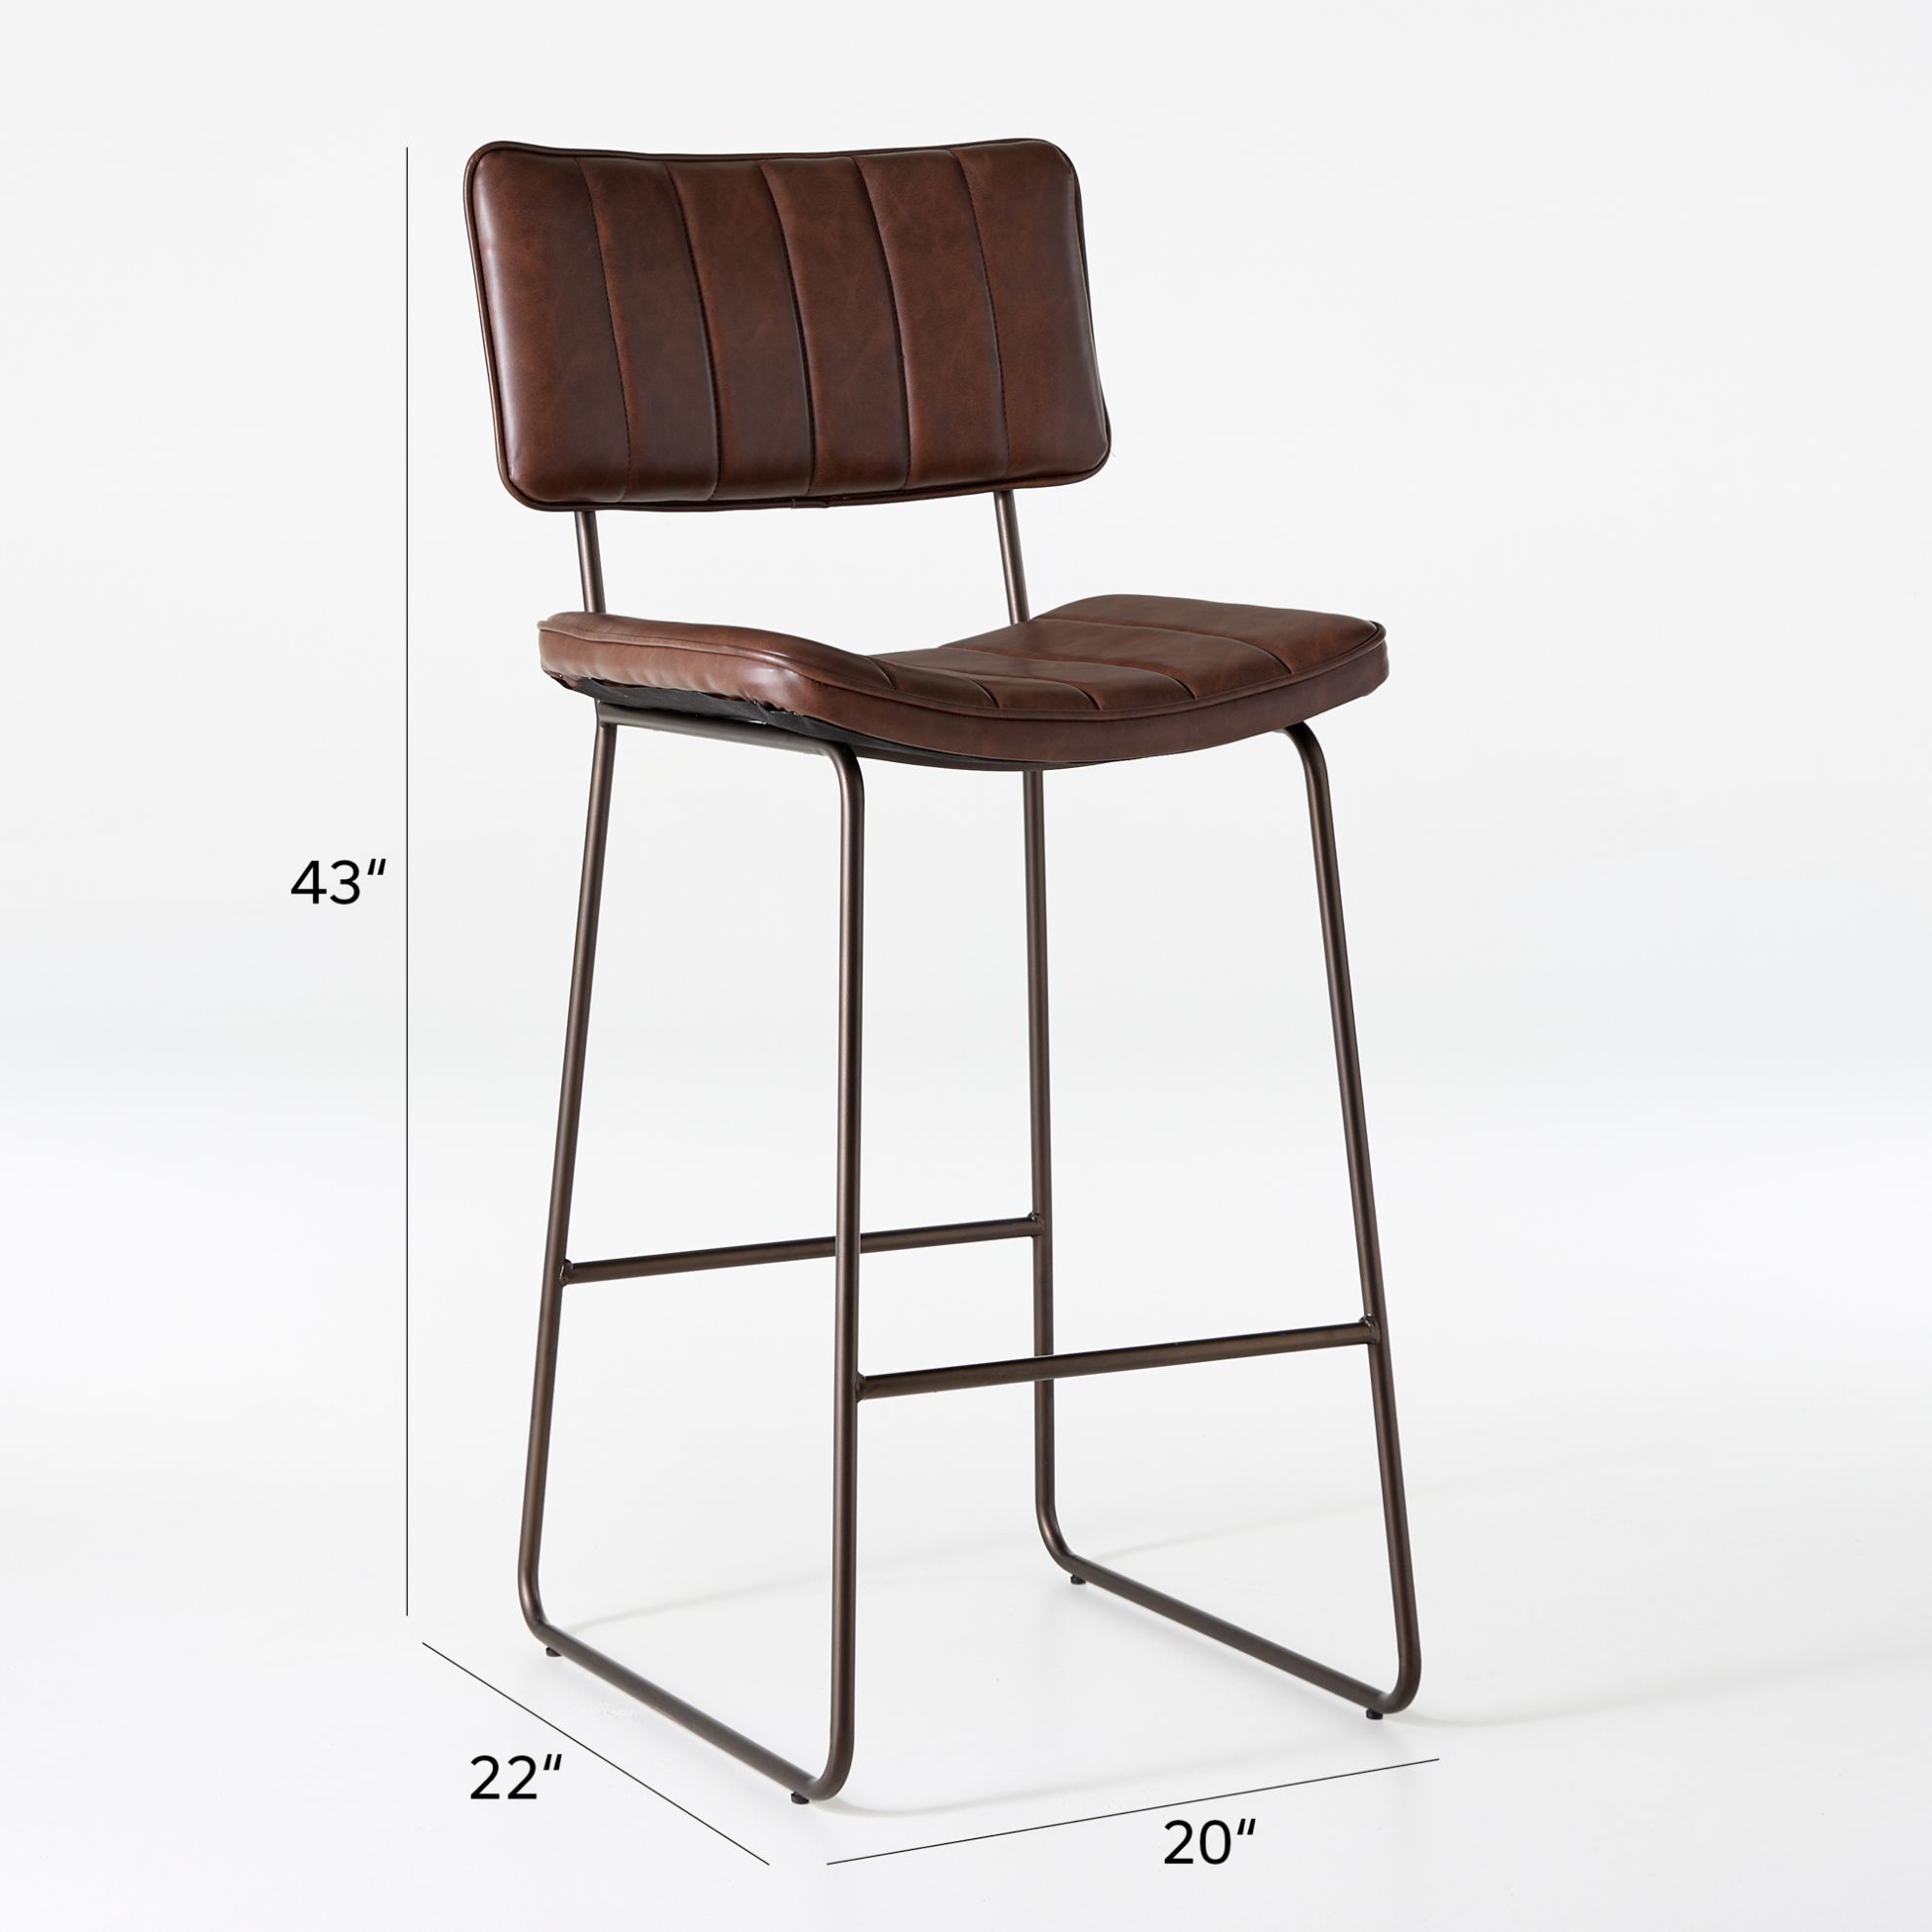 Picture of Tribeca Bar Stool